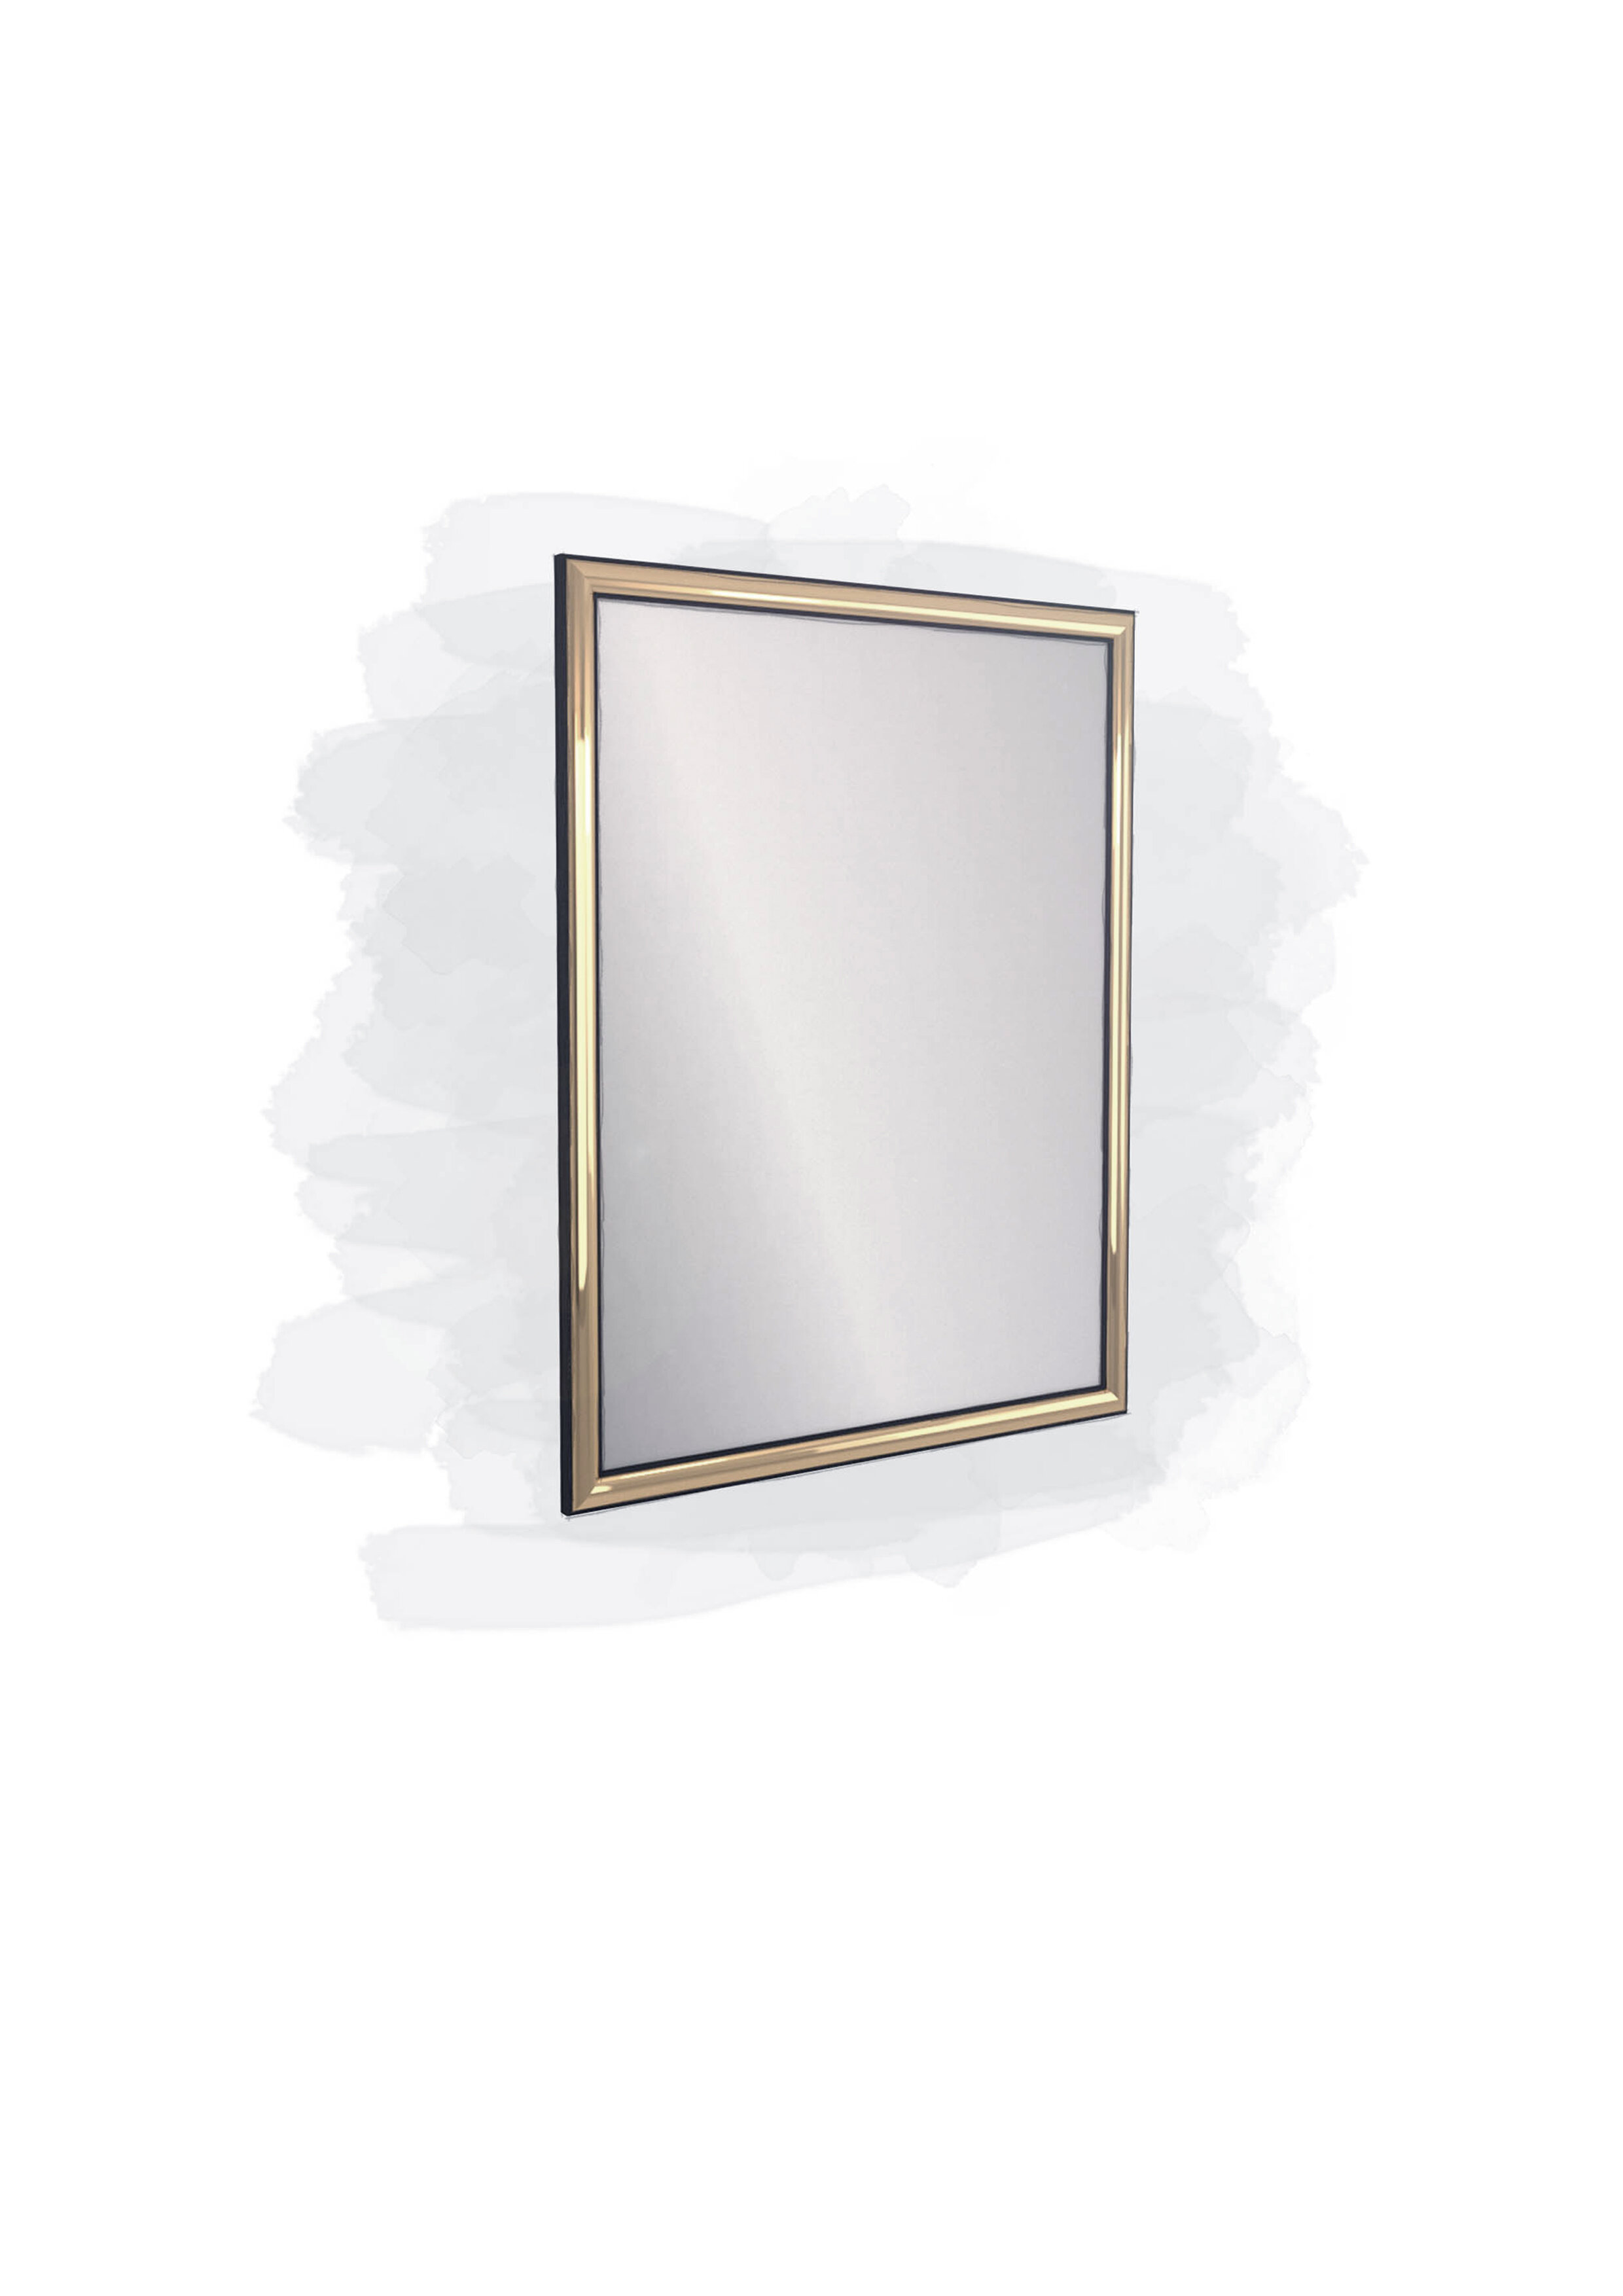 FRD4950 FACETED WALL MIRROR IMAGE.jpg